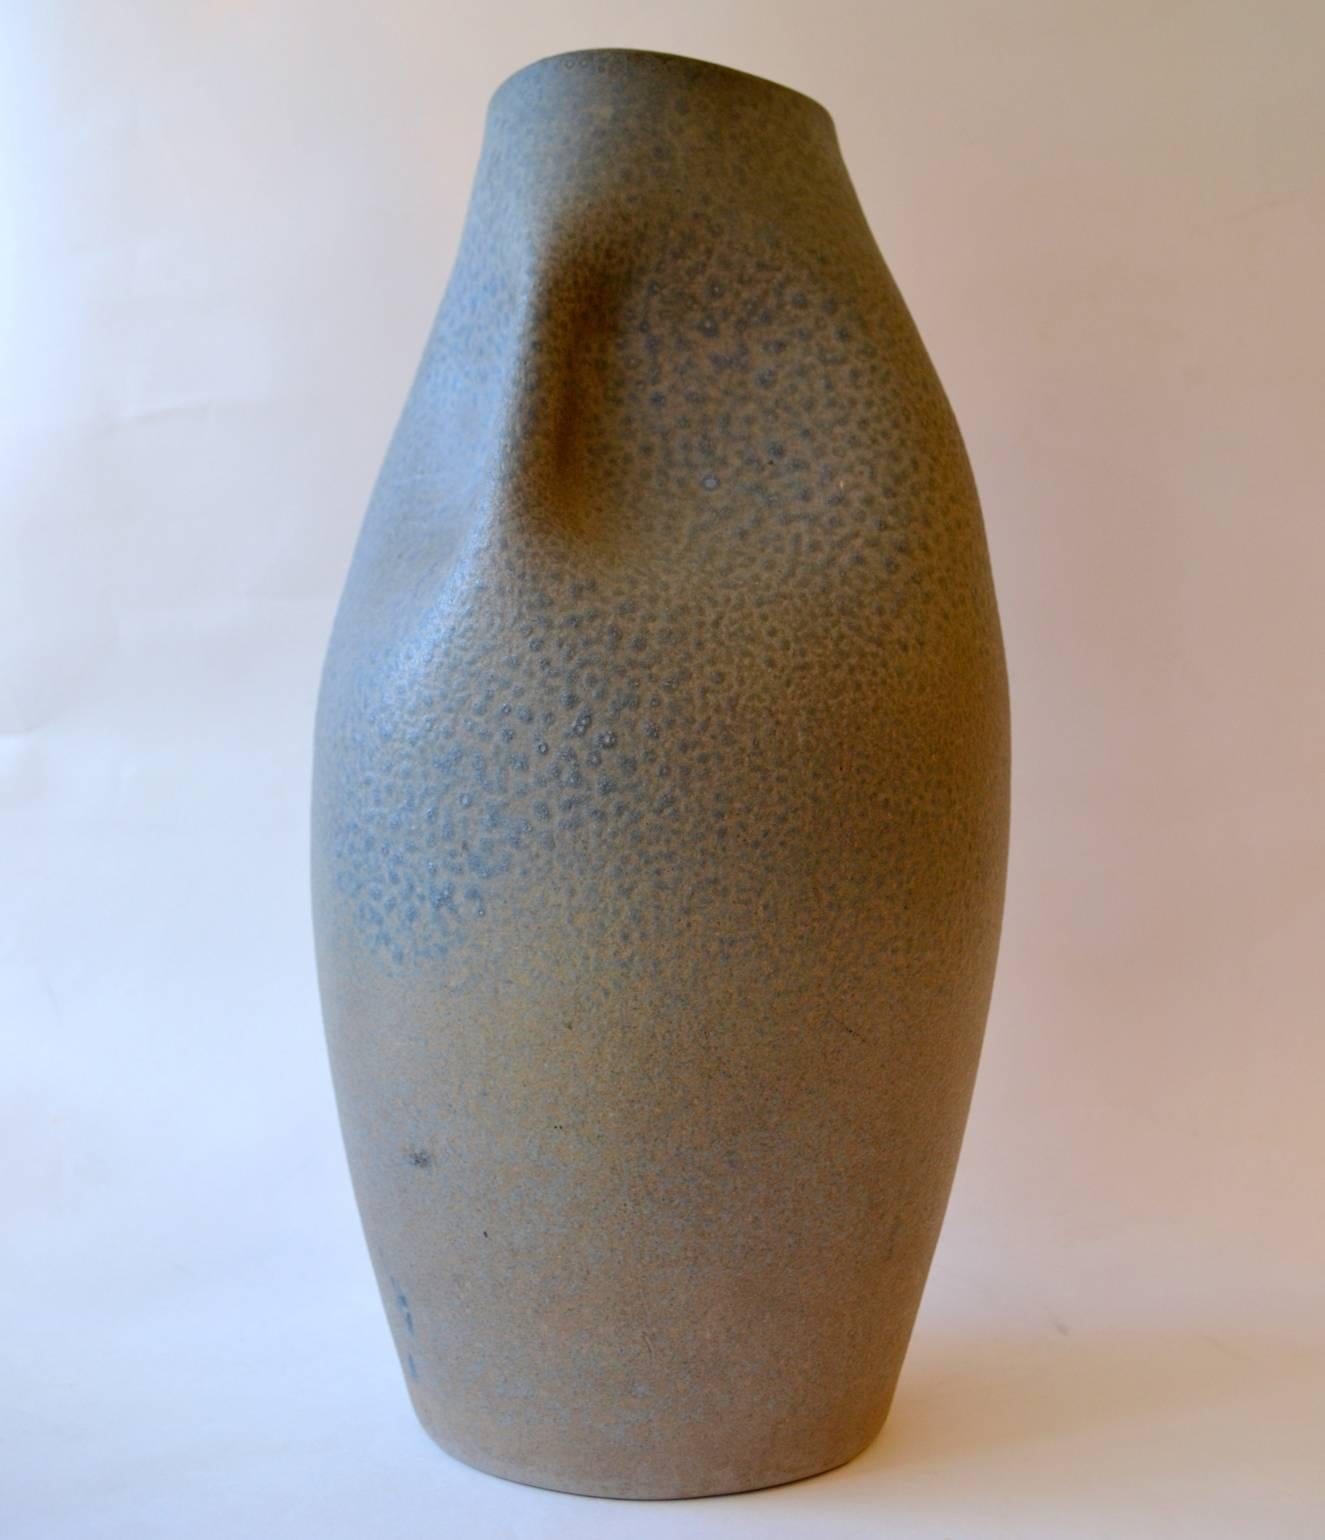 Large sculptural hand thrown and hand manipulated vase with a subtle blue textured glaze, by Bernh Jak Gieriz, Adendorf, Bonn, 1960's Germany. The vase is great as a floor vase or somewhere in the house in a forgotten corner and will draw attention